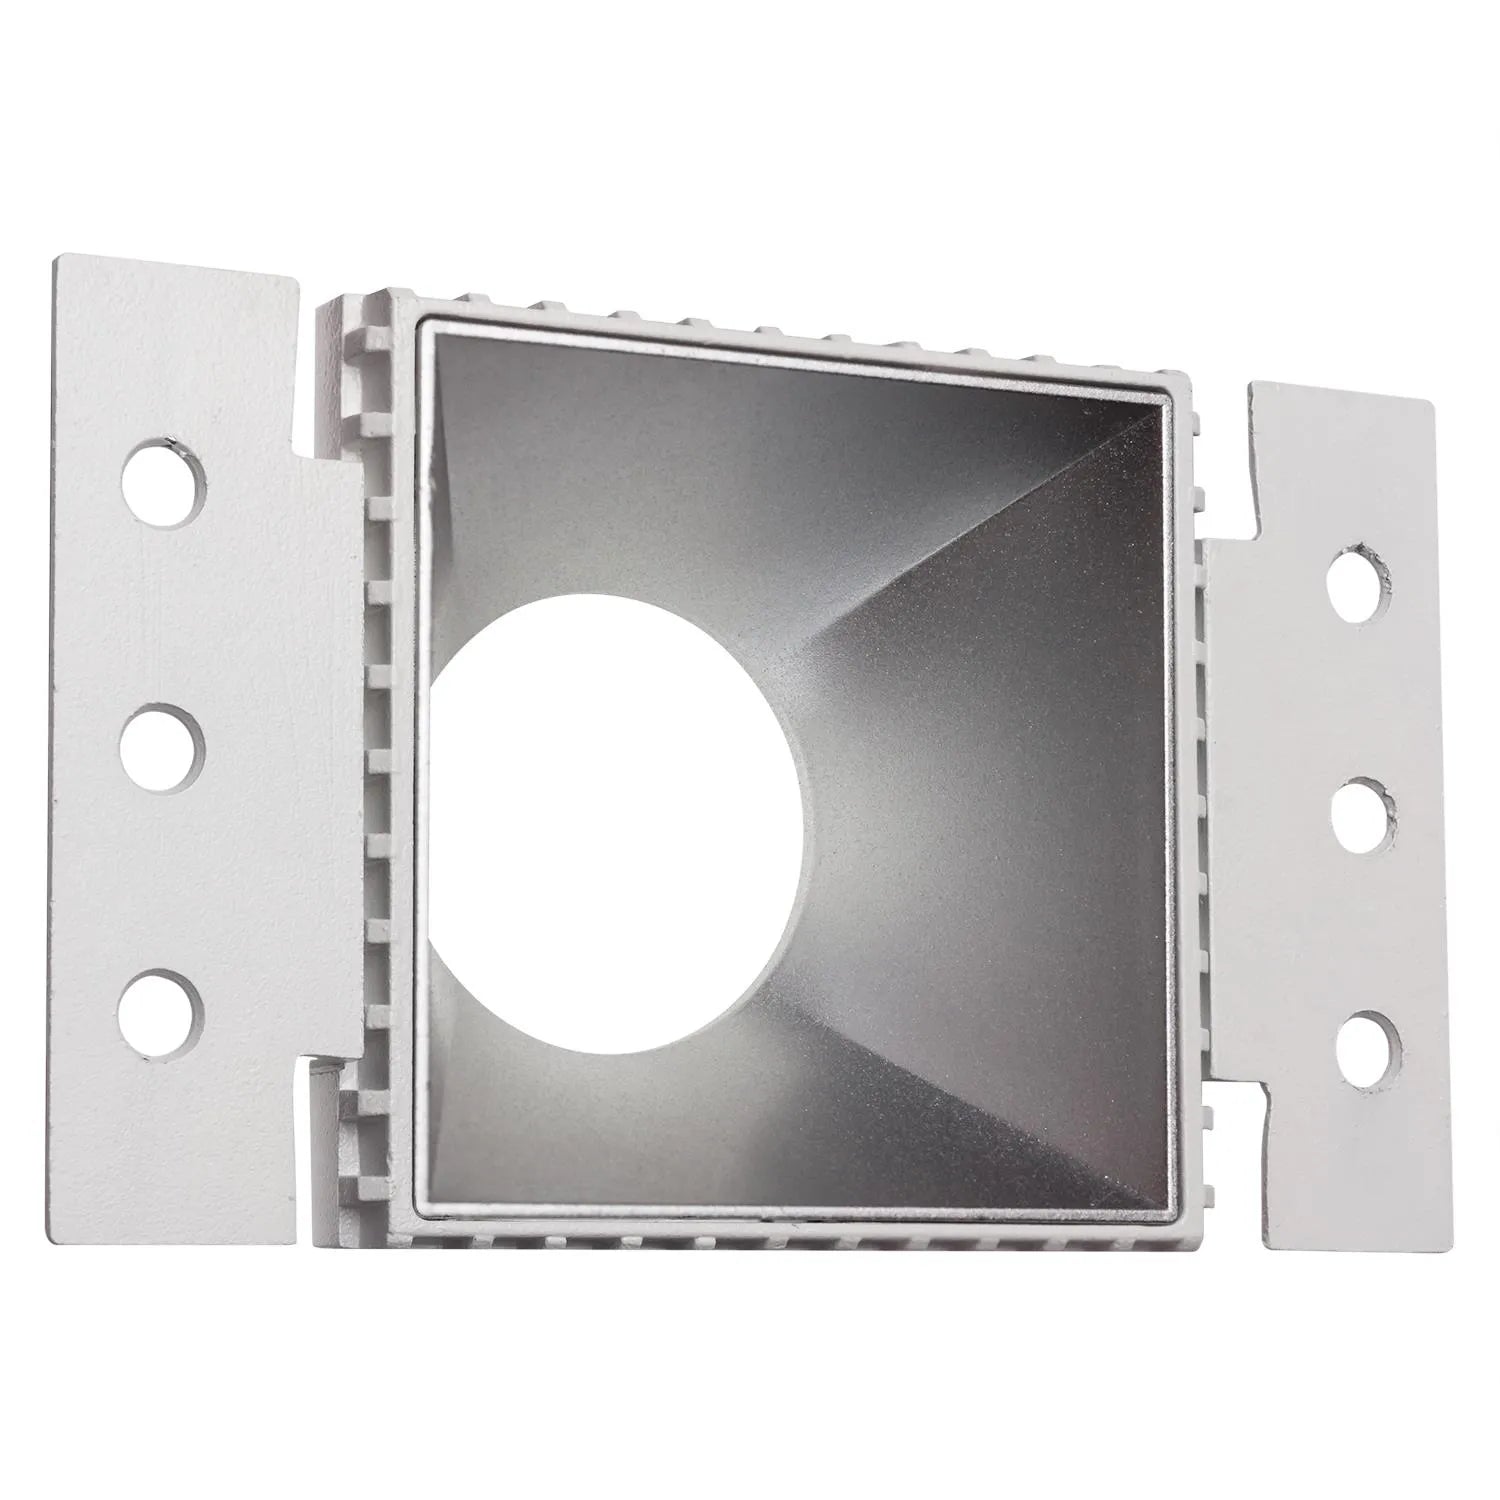 Westgate LRD-TL-10W-50K-4S-HZ LED 4" Round Architectural Trimless Recessed Light Residential Lighting - Matte Silver